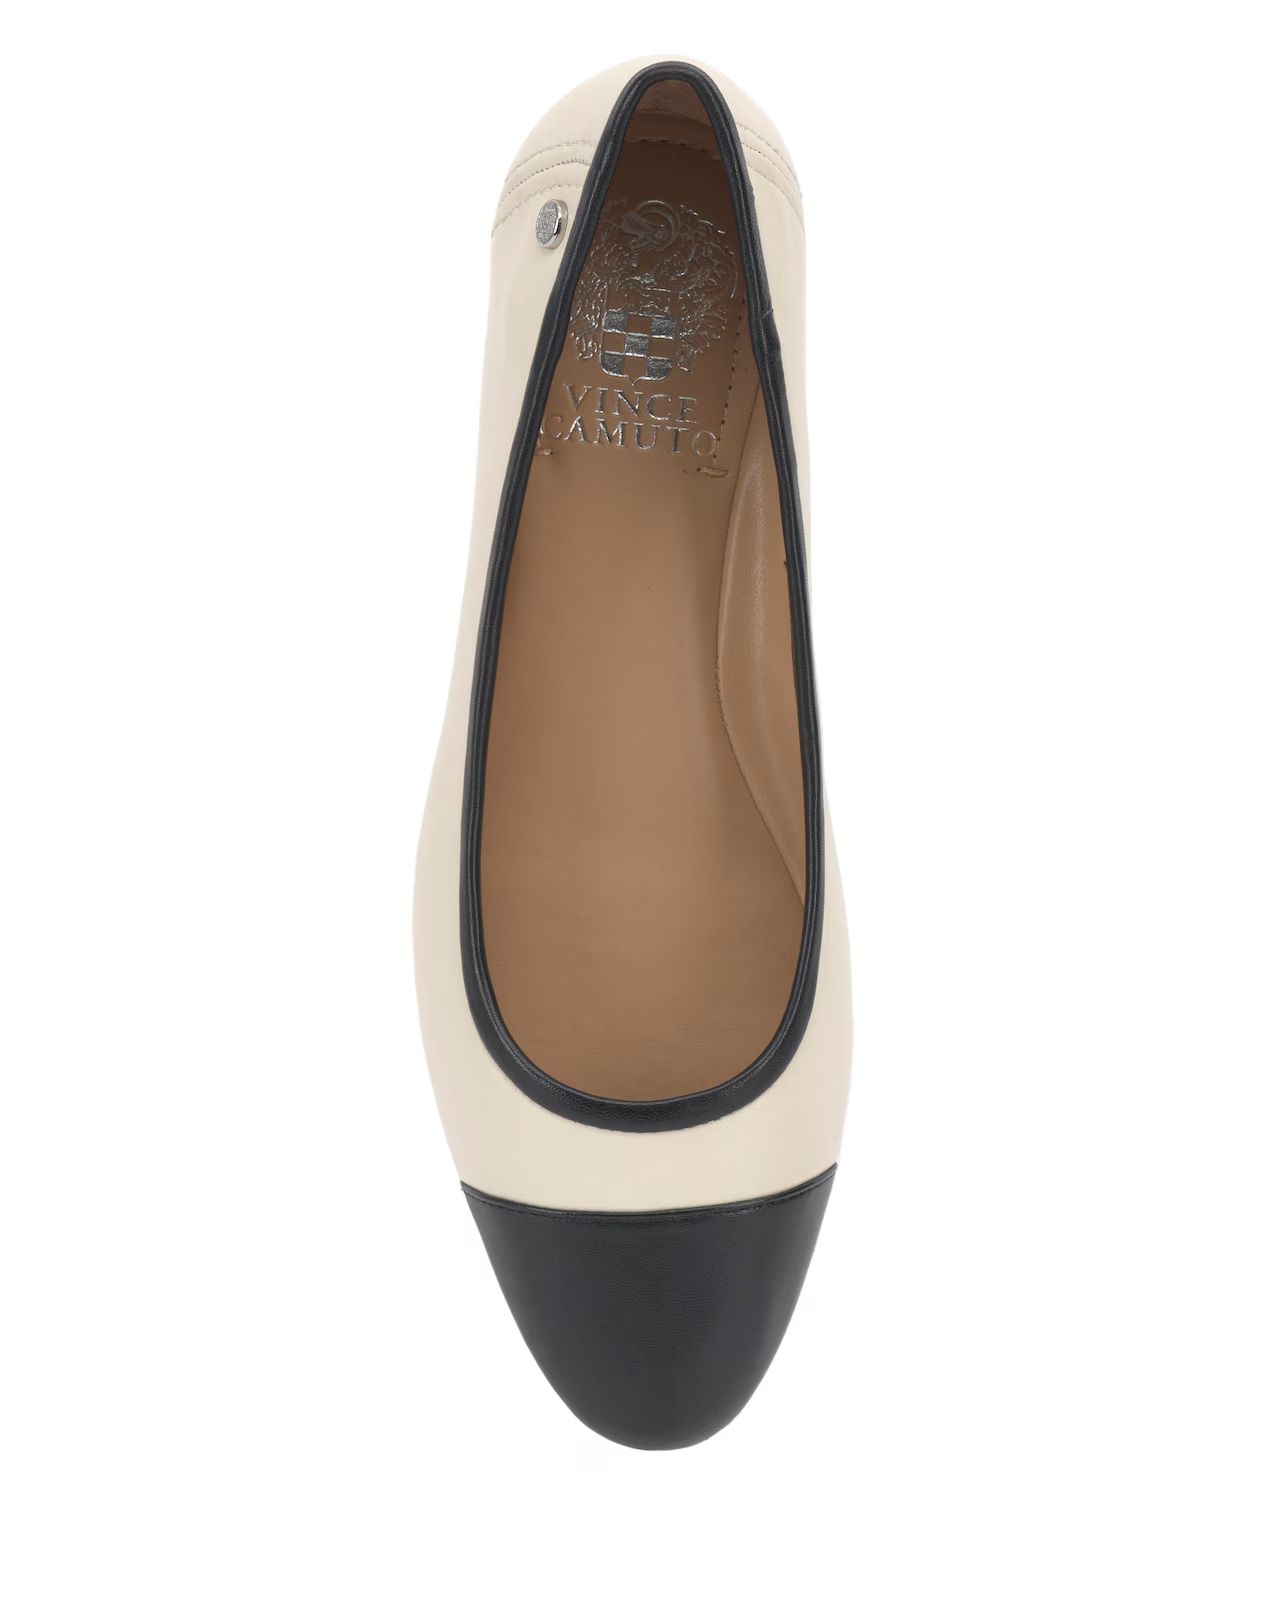 Vince Camuto Minndy Cap Toe Flat | Vince Camuto